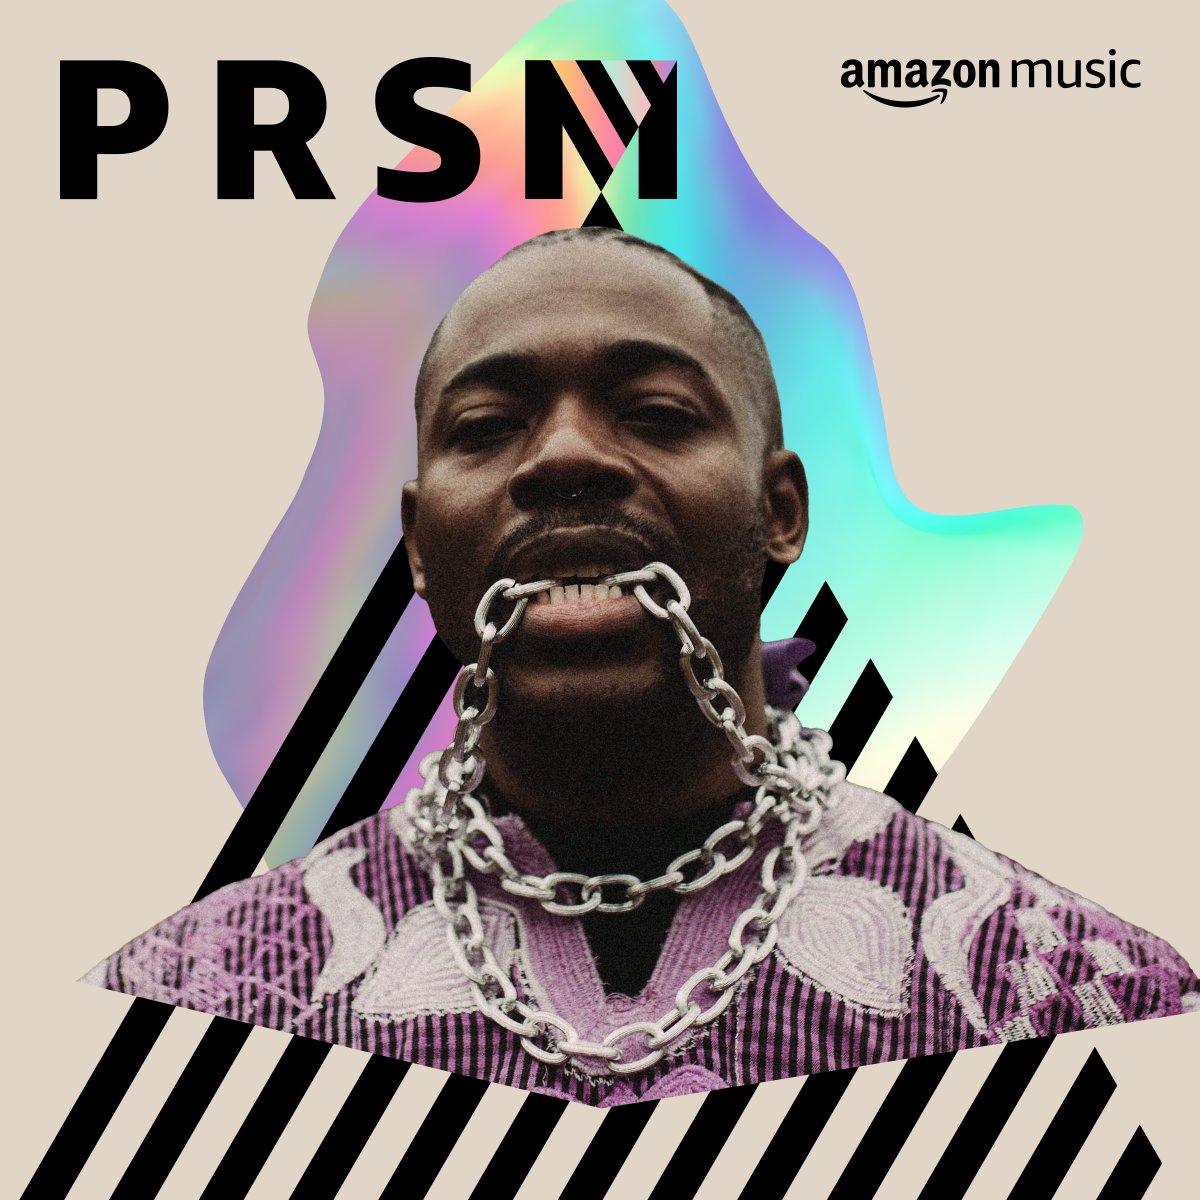 and speaking of @lovemauvey, check out this amazing support from @amazonmusic! the cover of the PRSM playlist, and if that was not enough, he is also on the Amazon Music billboard in downtown Toronto! Wowza! Congratulations Mauvey!